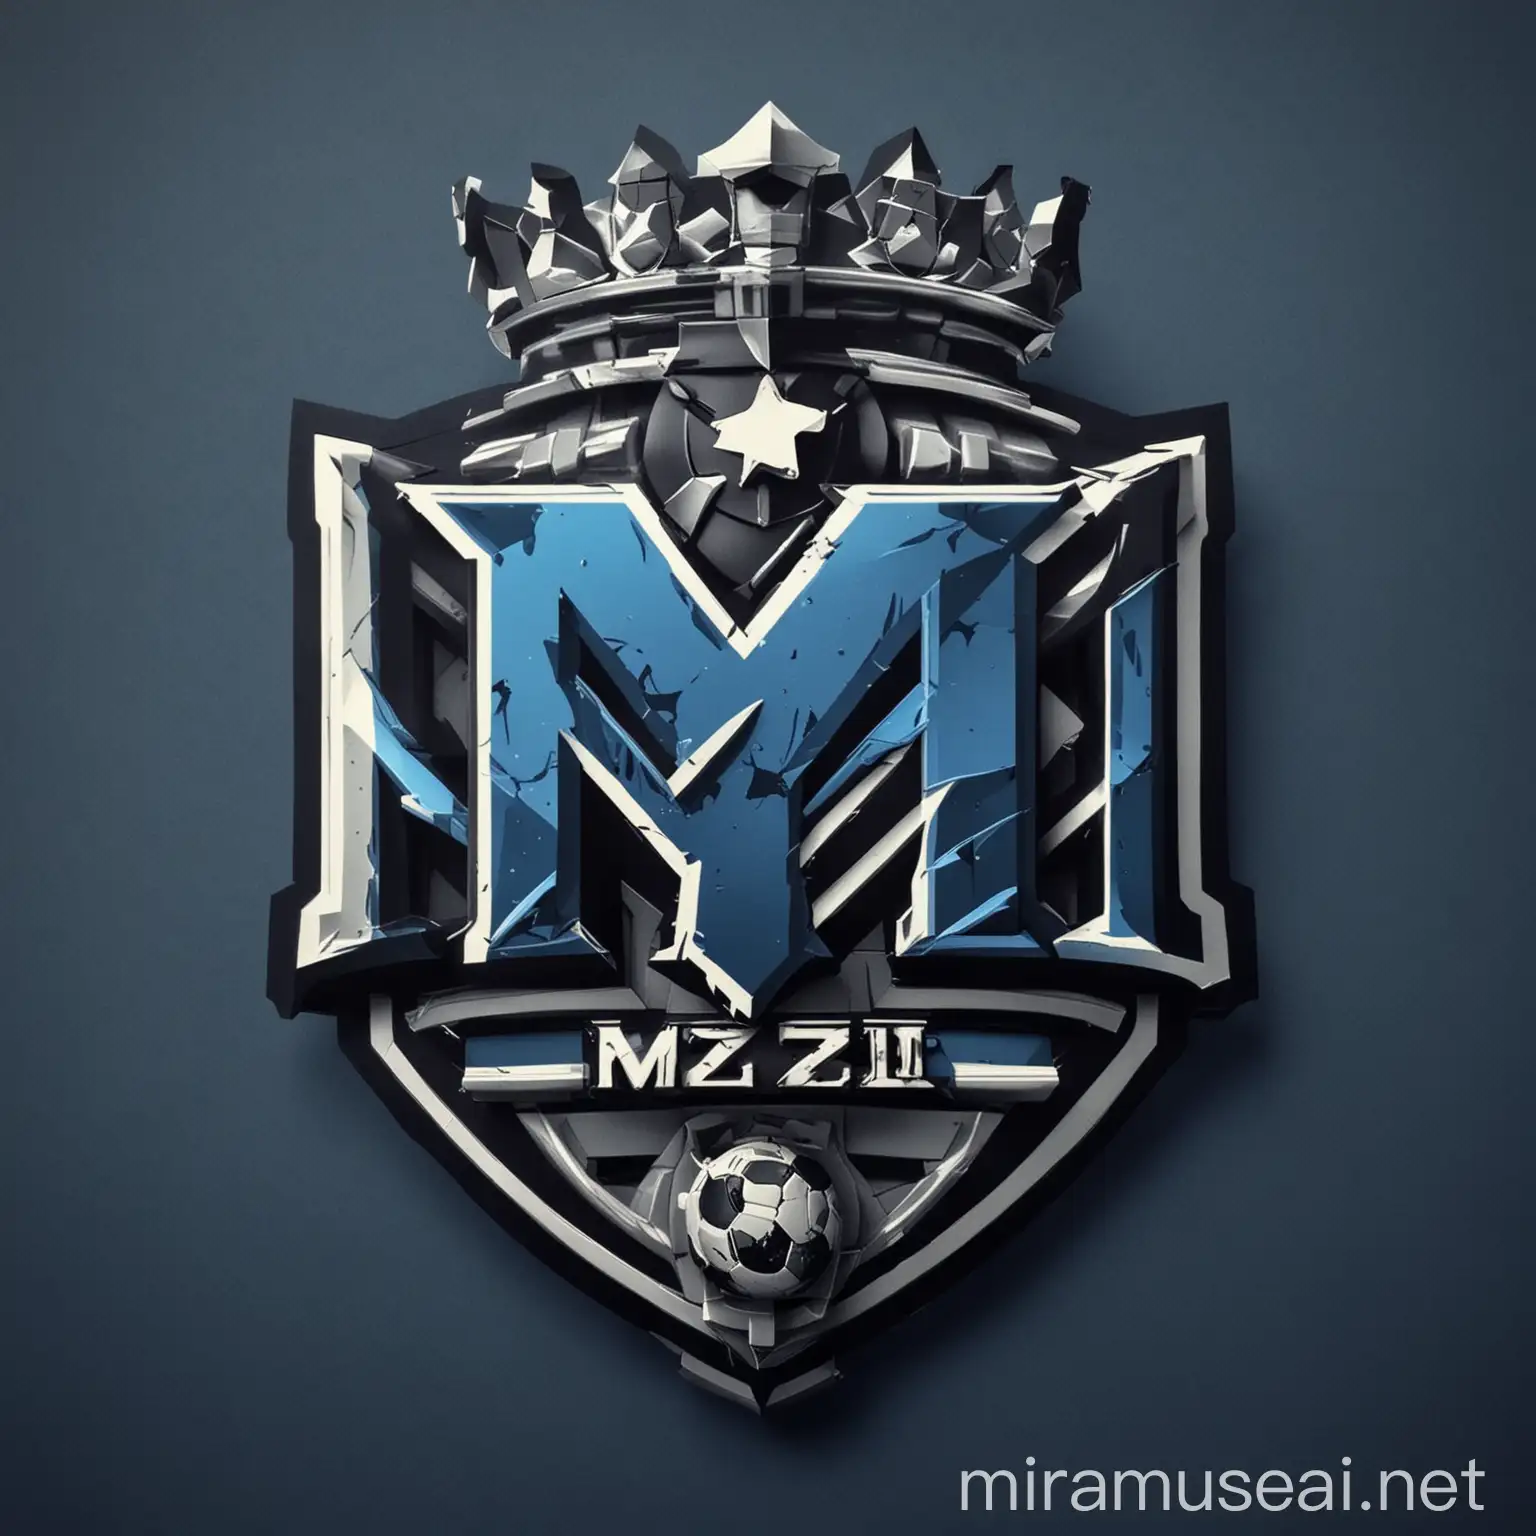 Computer Engineering Football Team Logo with M2Z11 in Blue Tones